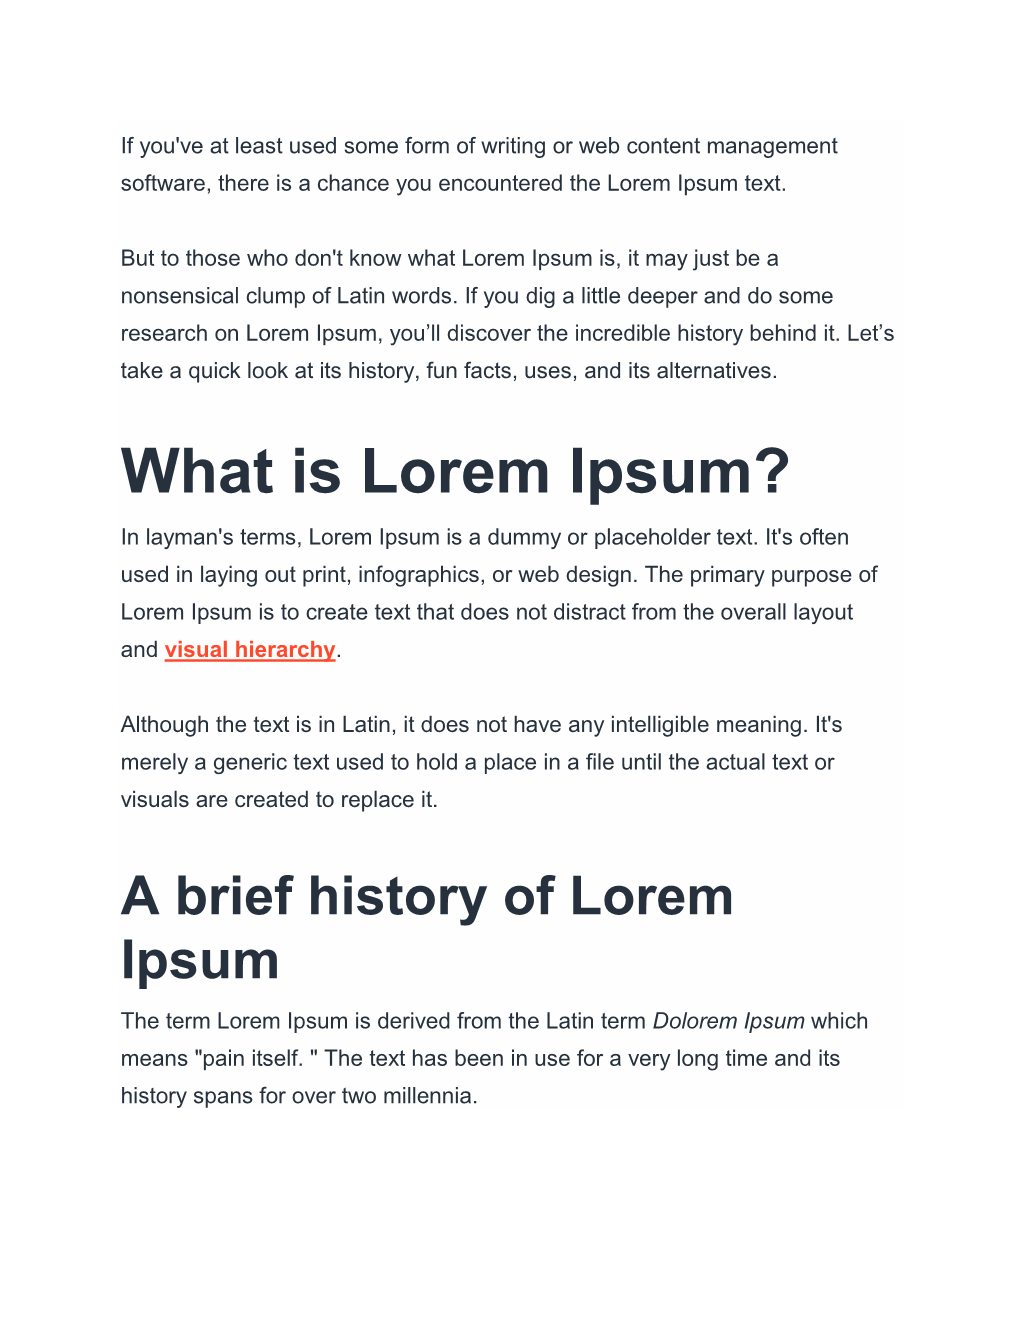 What Is Lorem Ipsum? in Layman's Terms, Lorem Ipsum Is a Dummy Or Placeholder Text